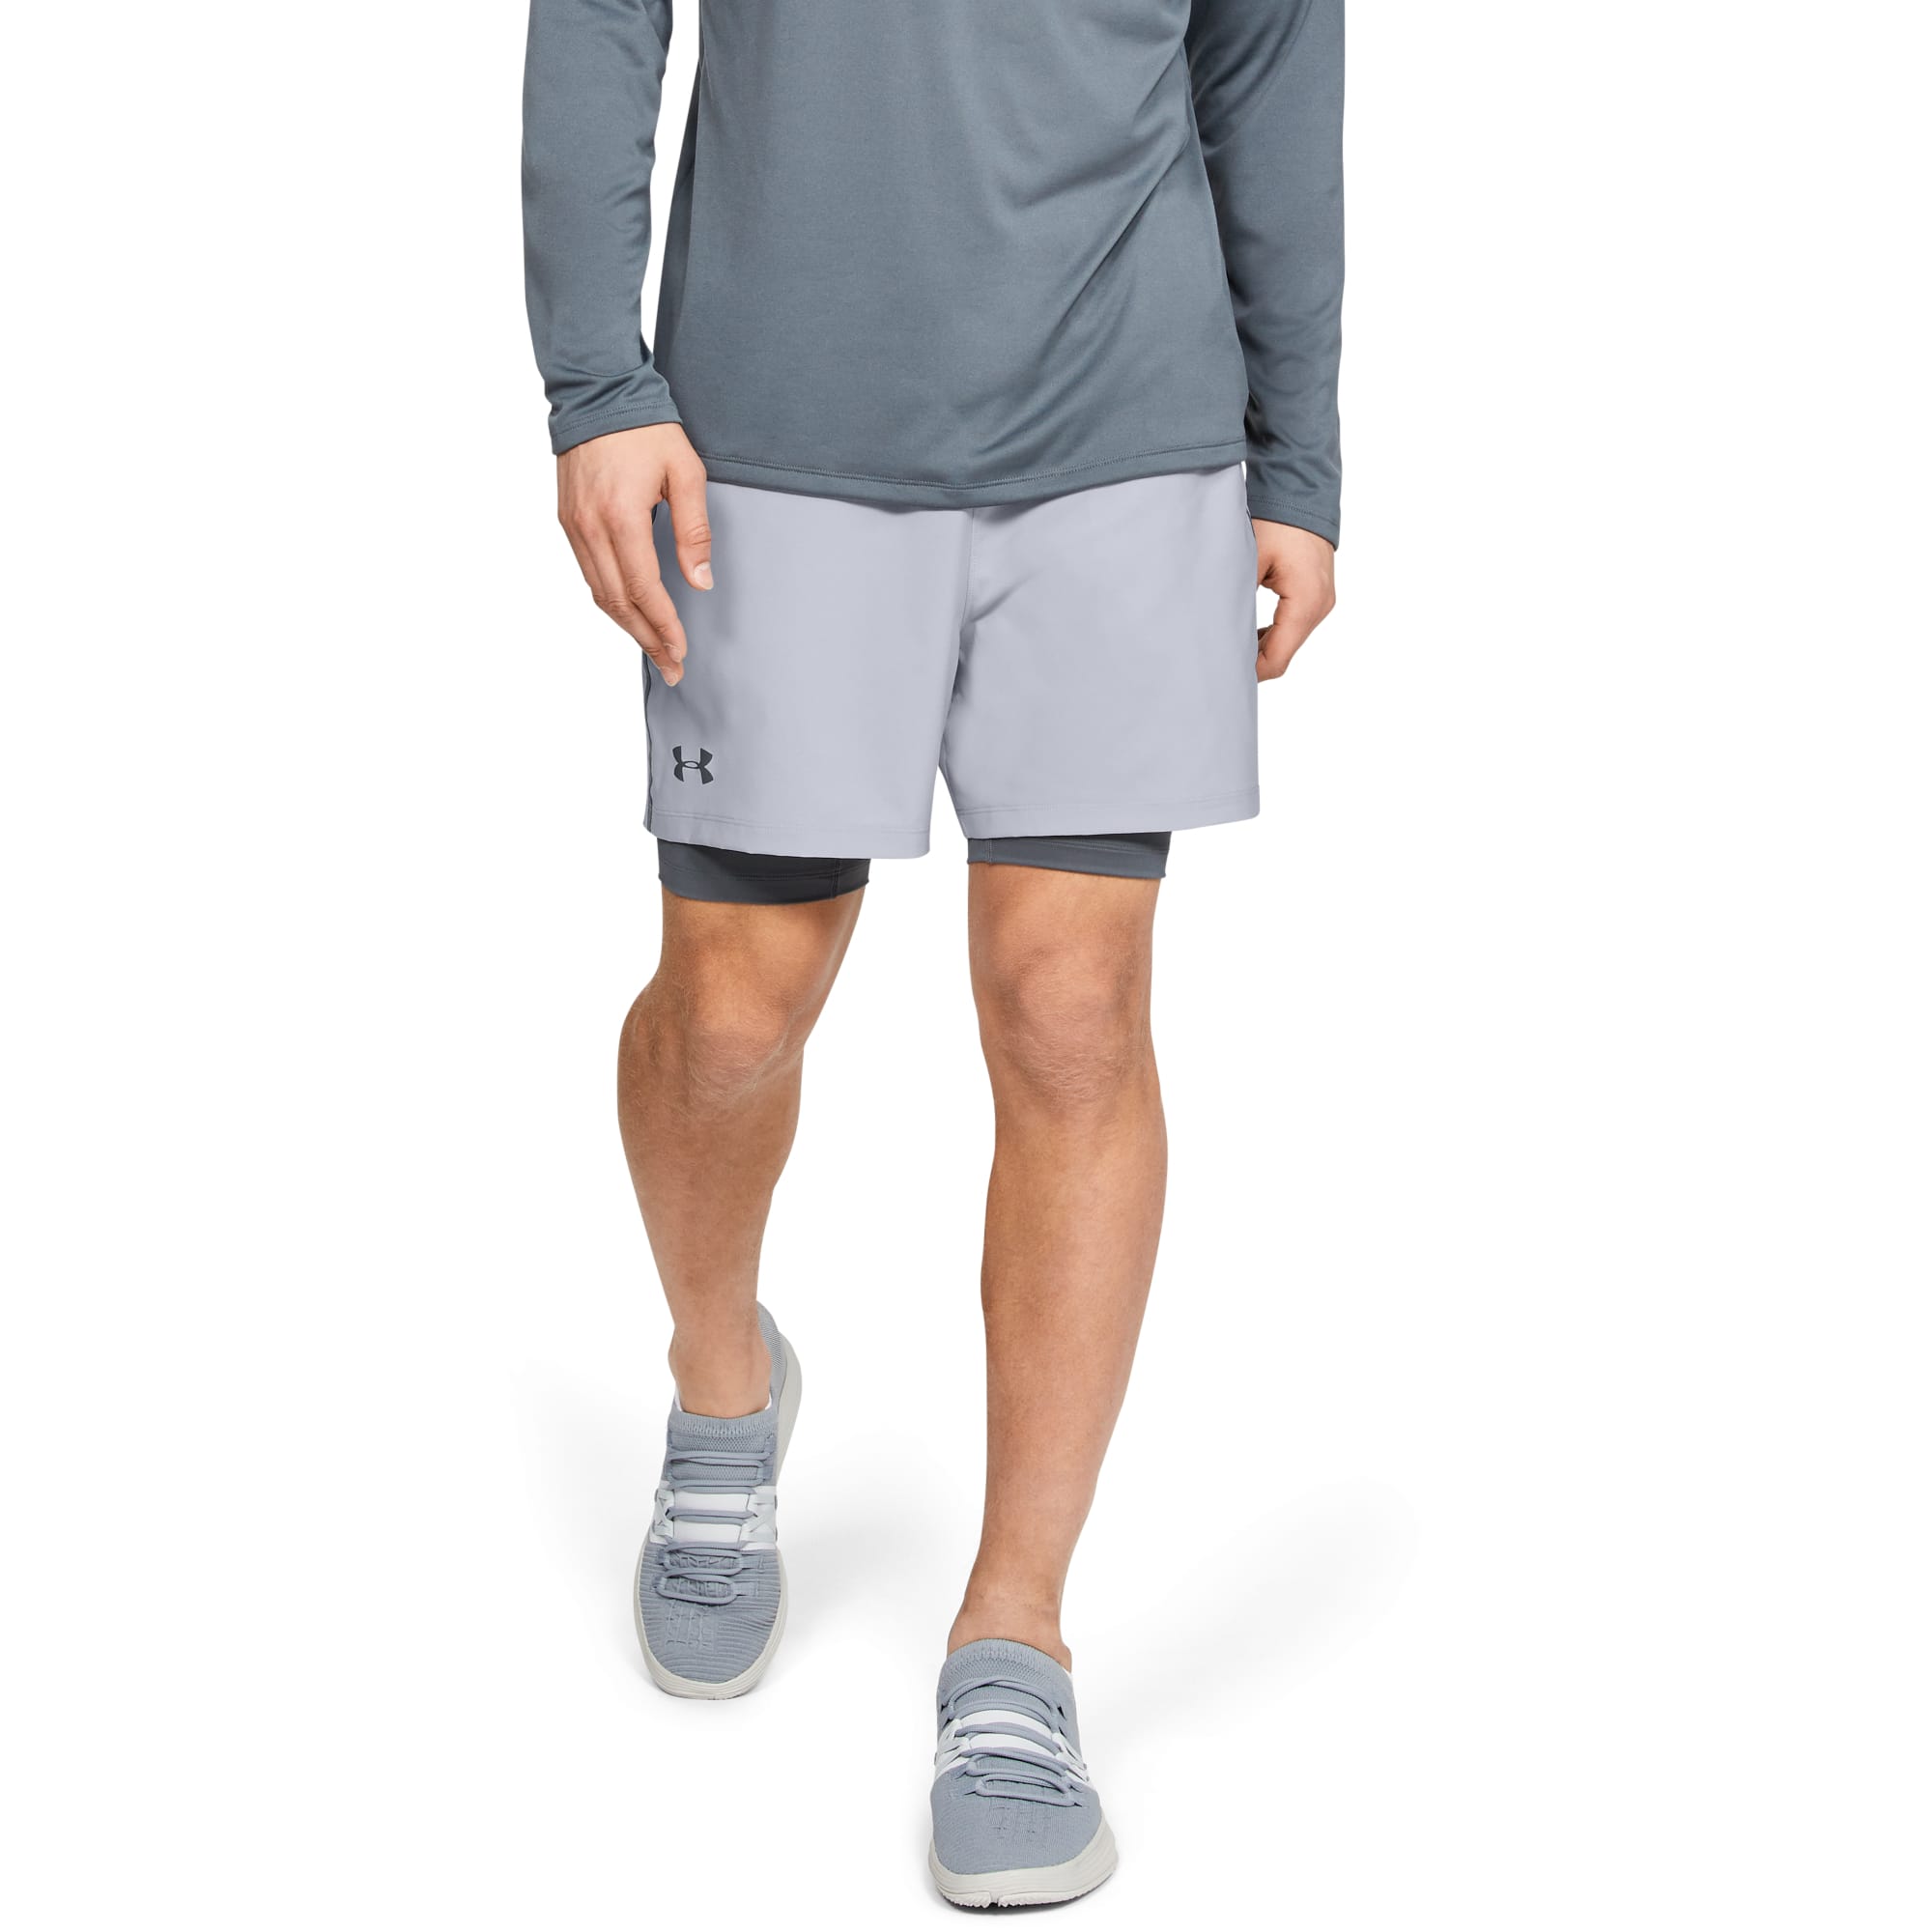 Buy Under Armour Qualifier 2-in-1 Shorts from Outnorth